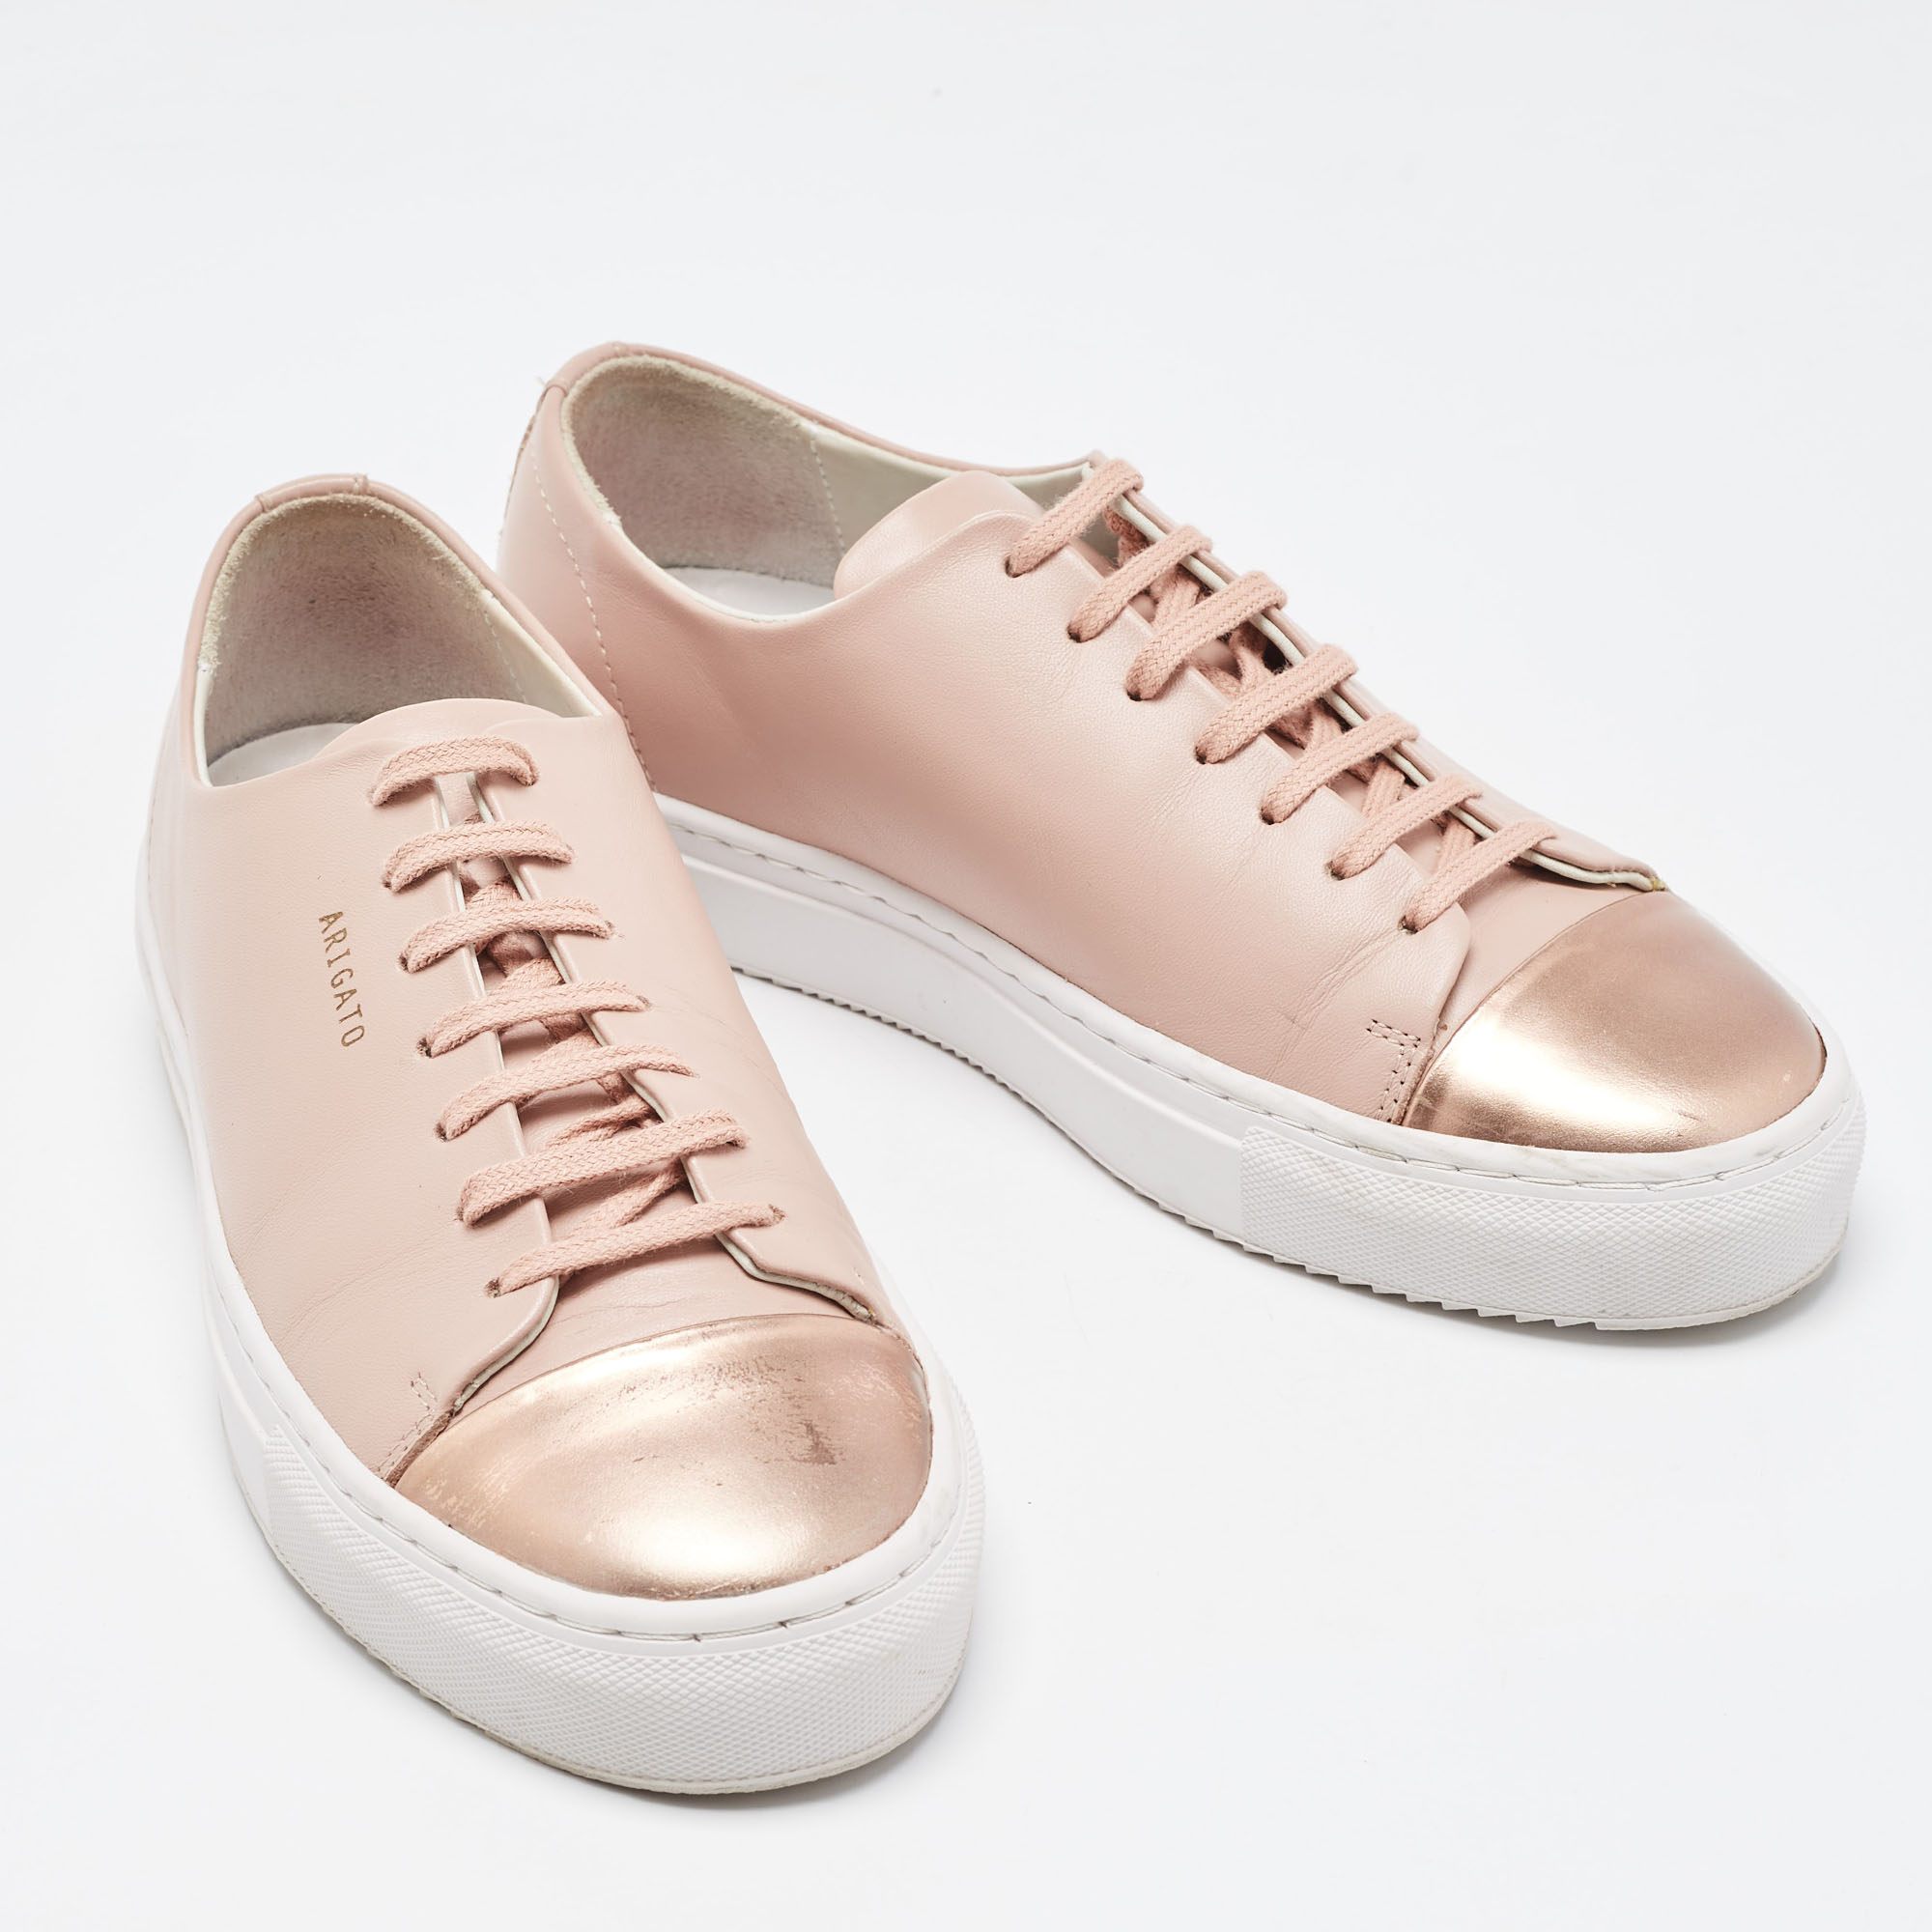 Axel Arigato Pink Leather Clean Low Top Sneakers Size 38